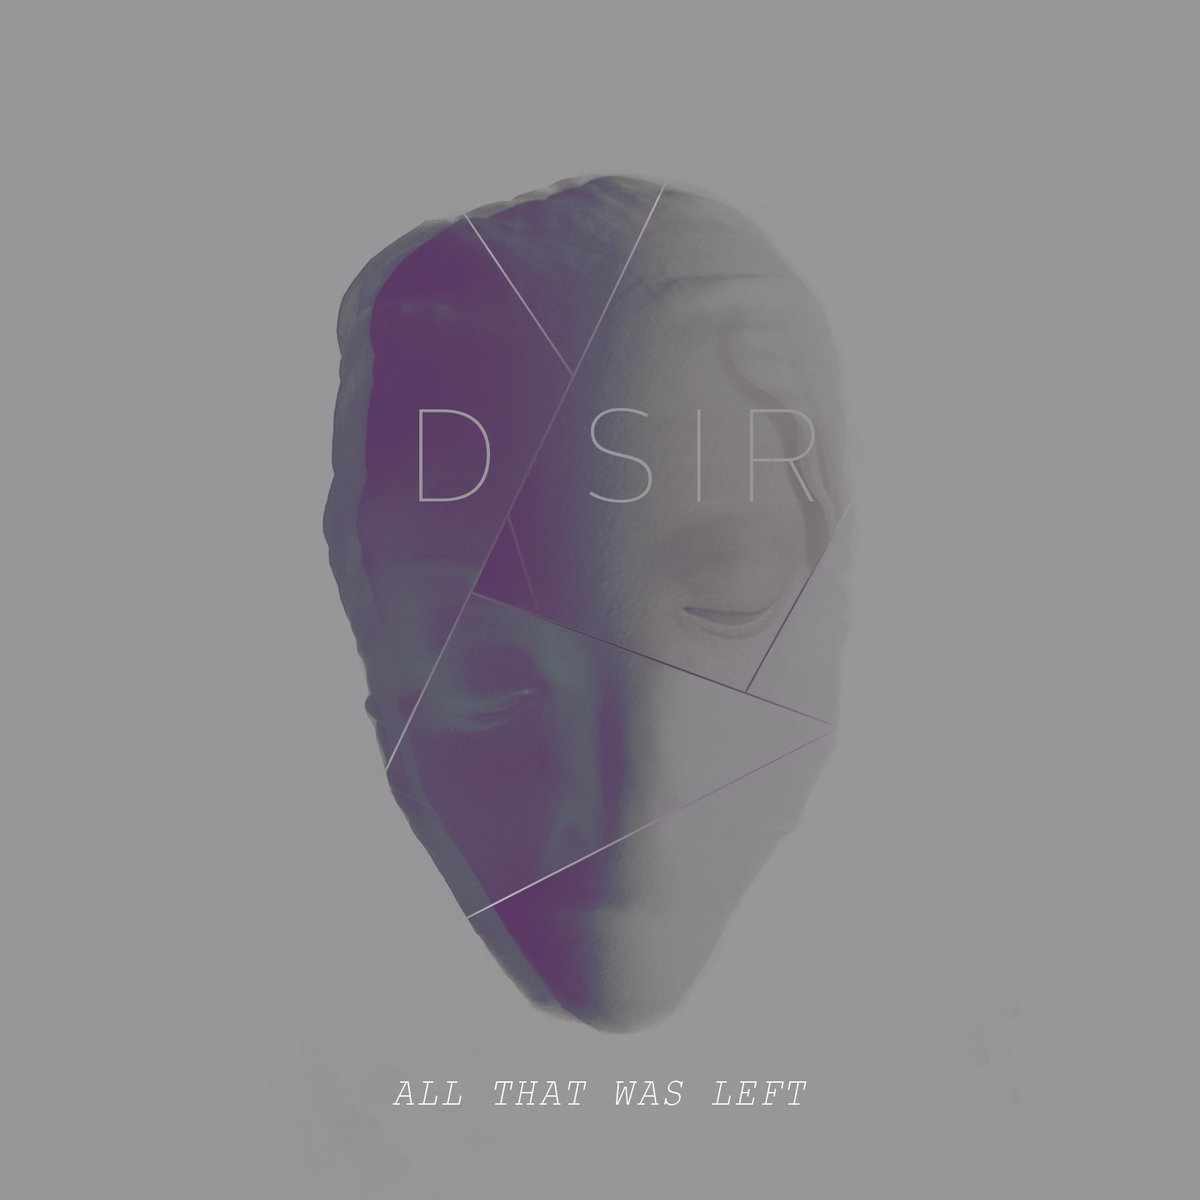 D/SIR, “All That Was Left”